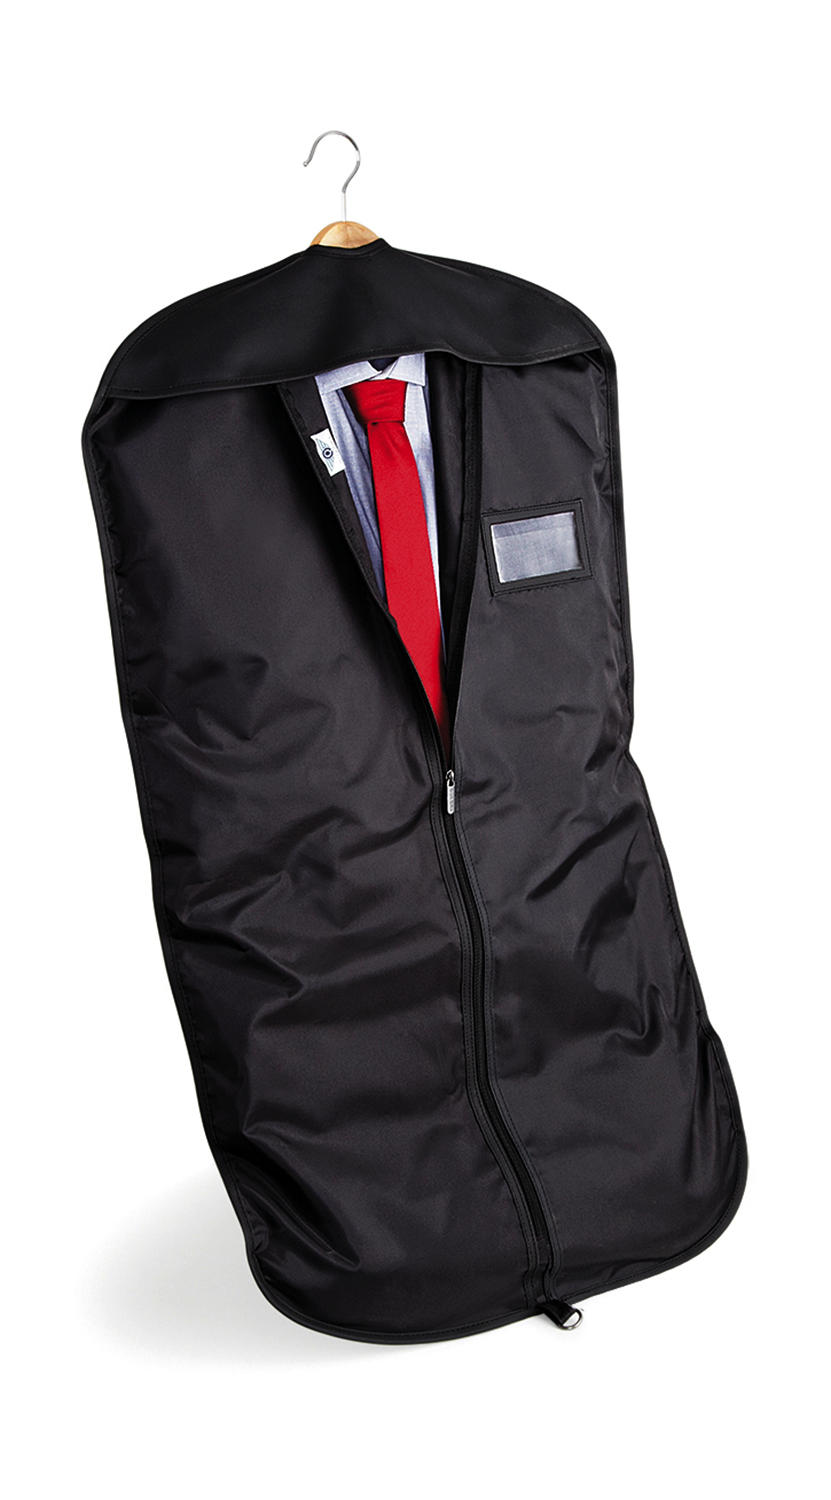  Deluxe Suit Bag in Farbe Black